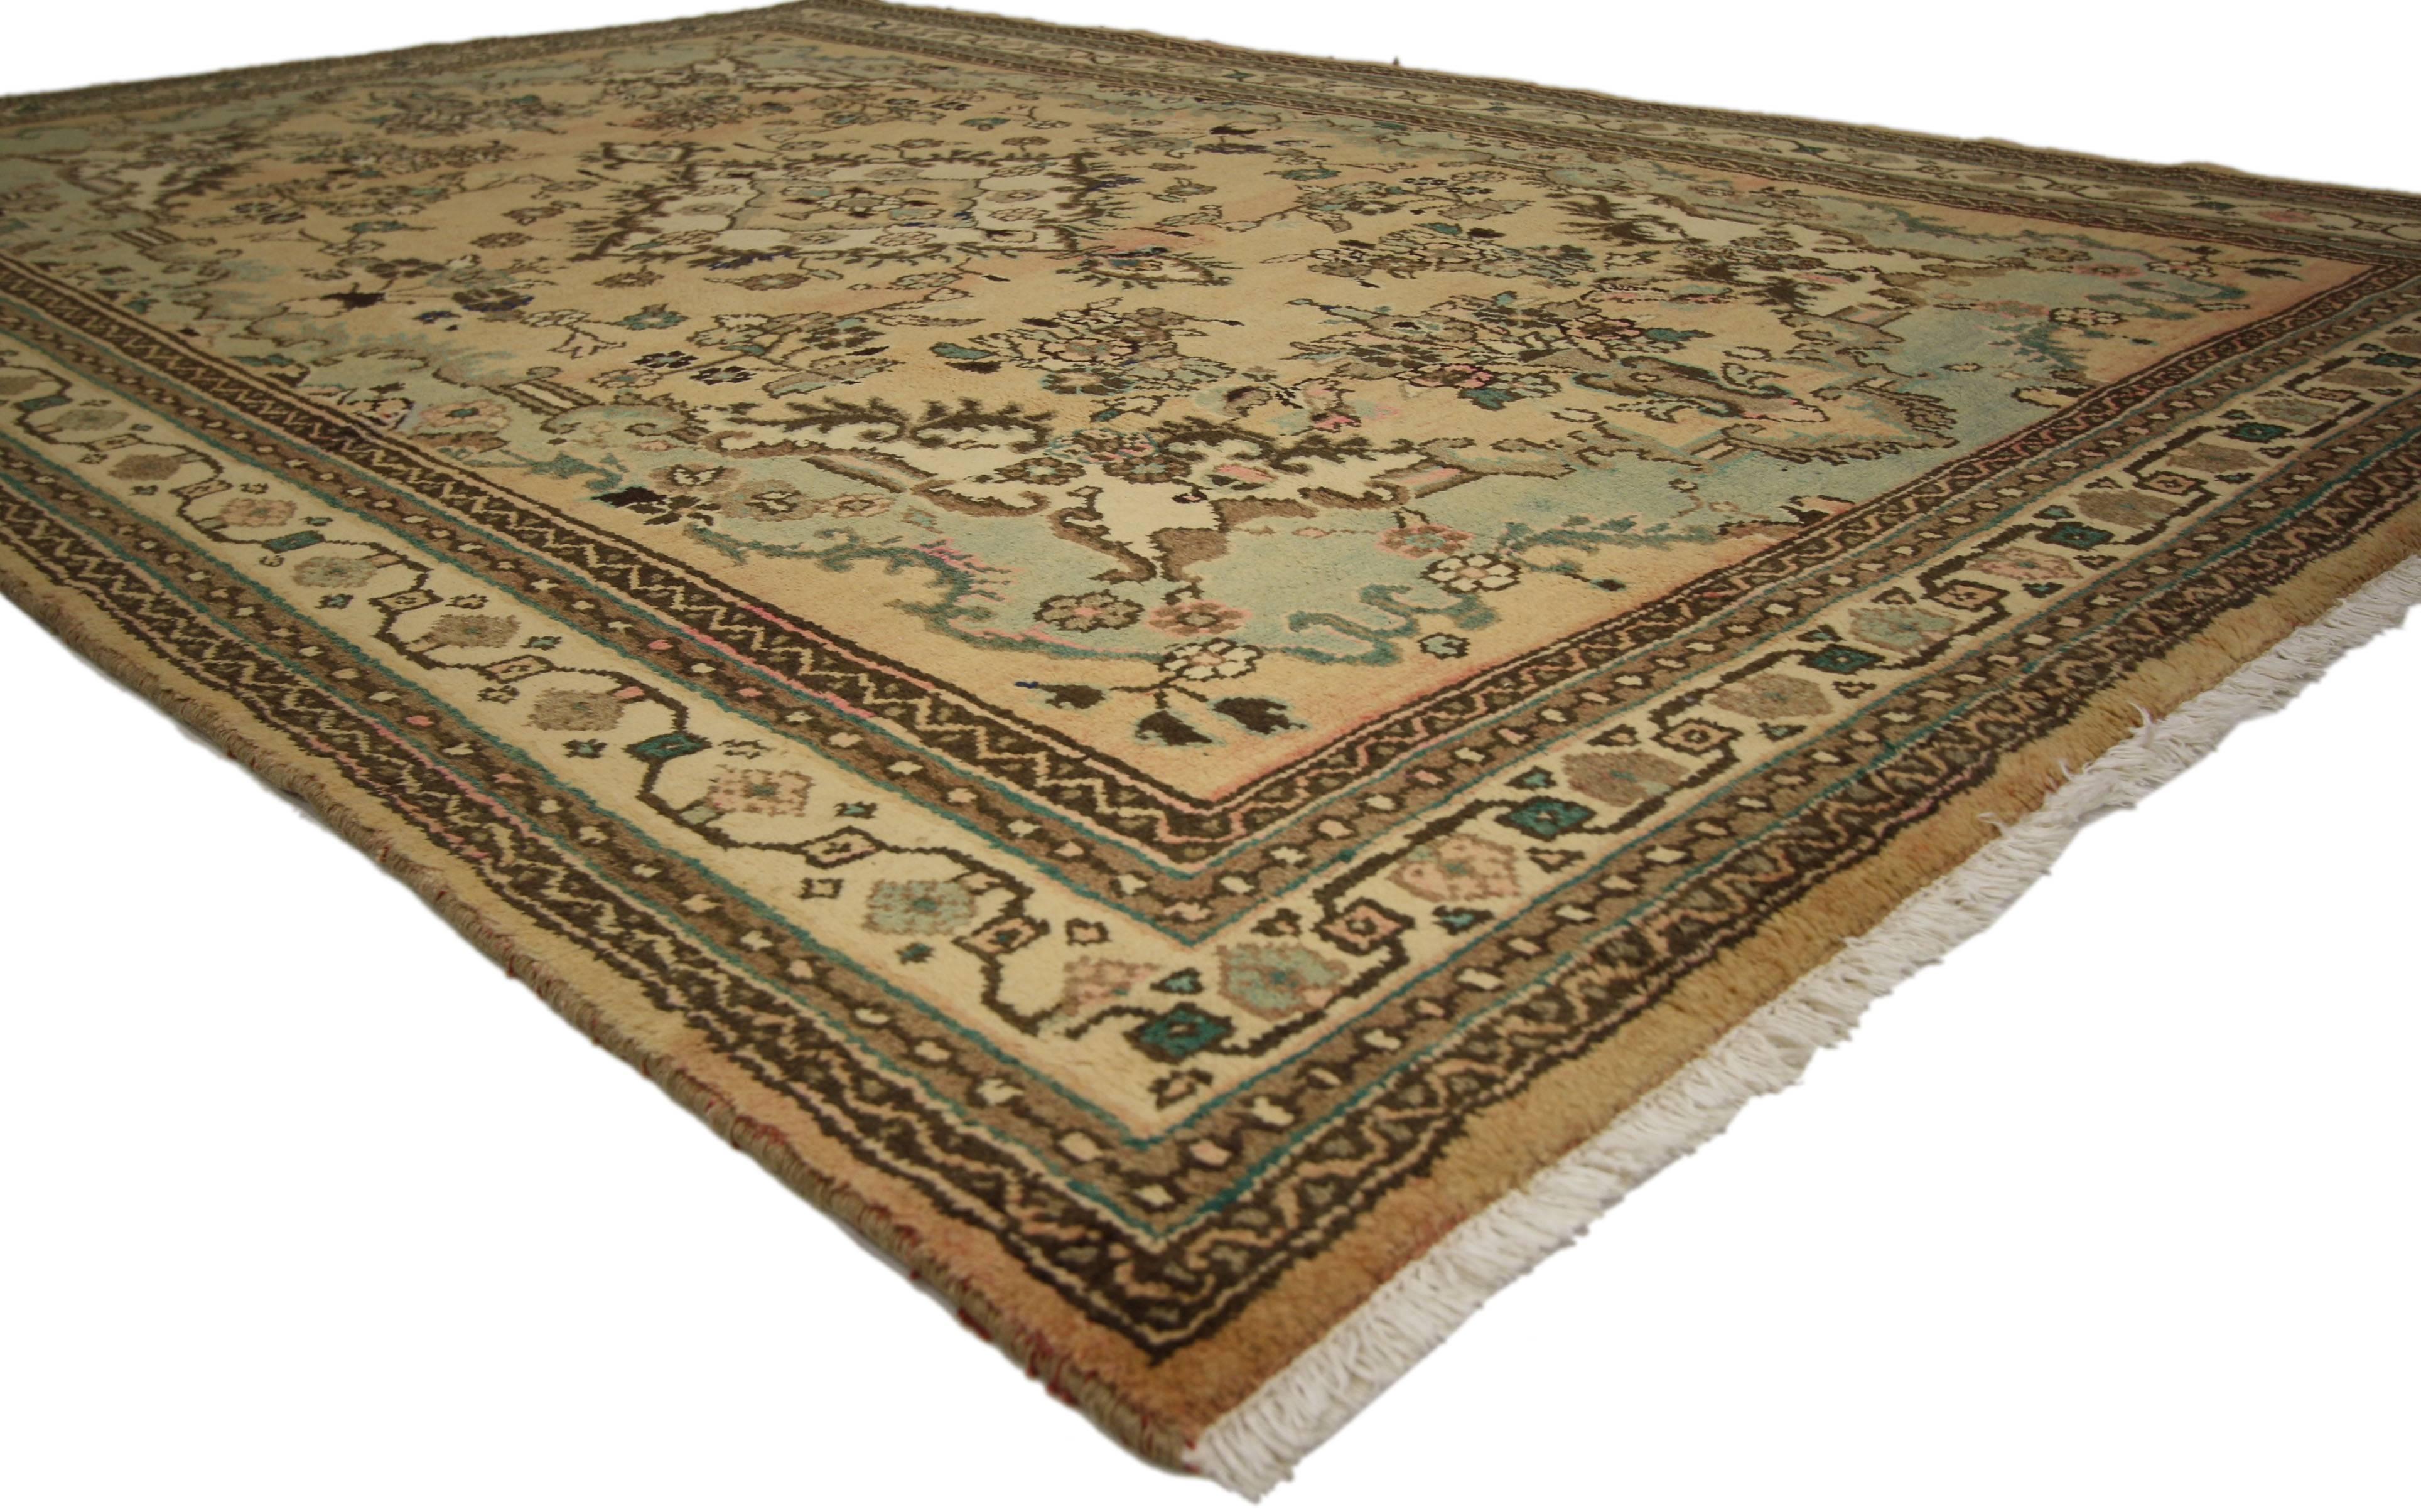 76022, vintage Persian Hamadan rug with American Sarouk style. This hand-knotted wool vintage Persian Hamadan rug with American Sarouk style features an elaborate cusped lozenge medallion surrounded by an arrangement of floral sprays on an abrashed